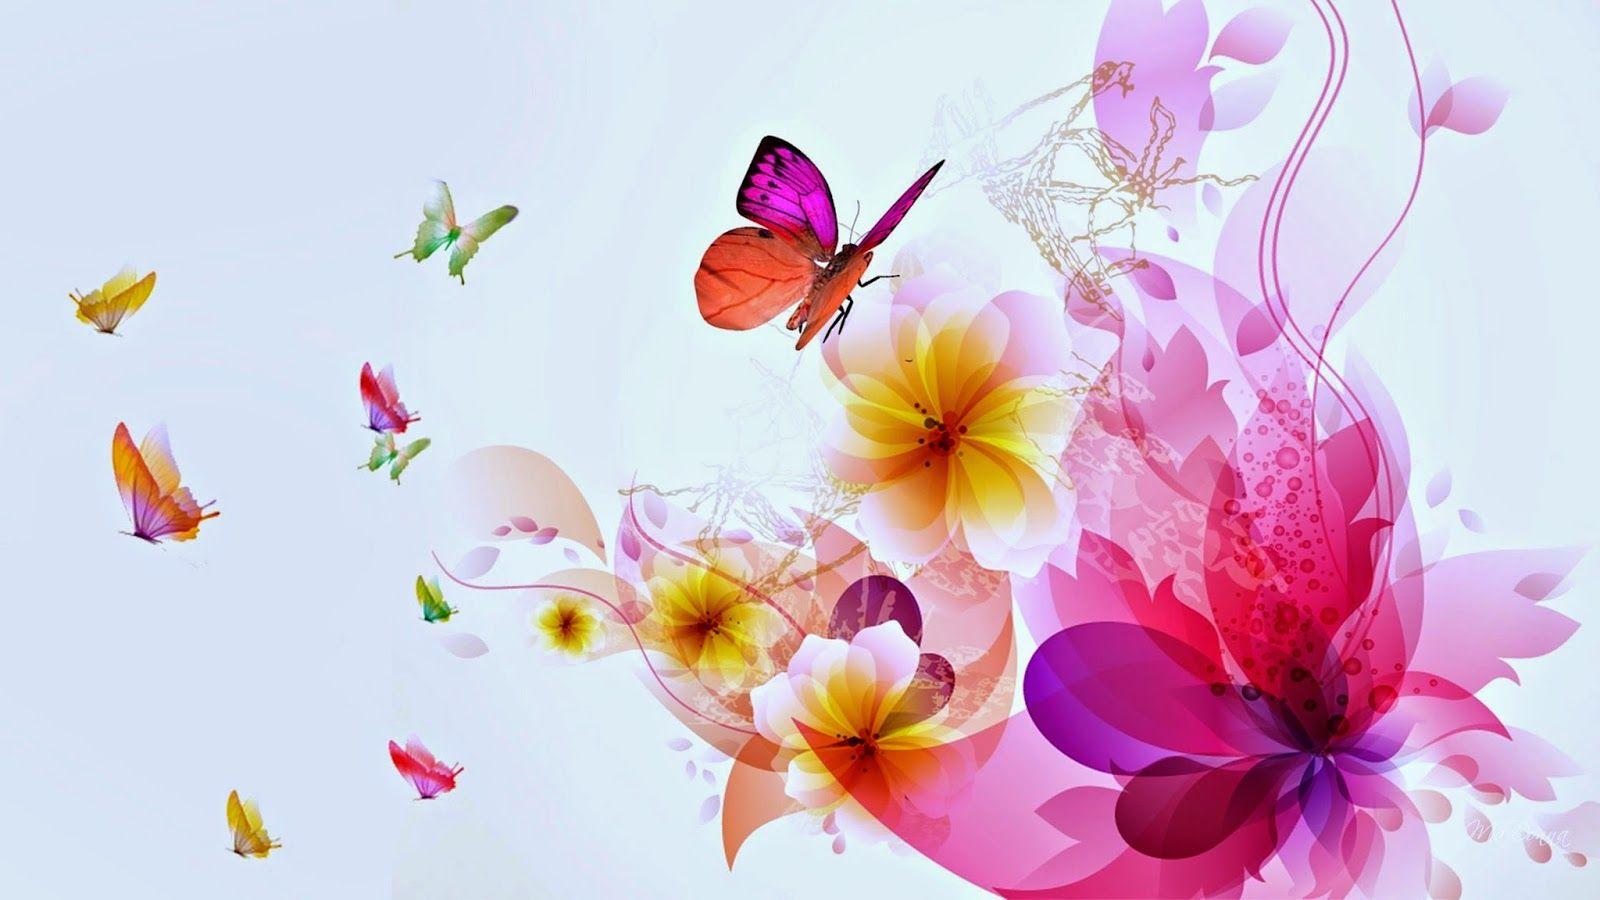 Colorful Butterfly designs backgrounds for desktop Abstract